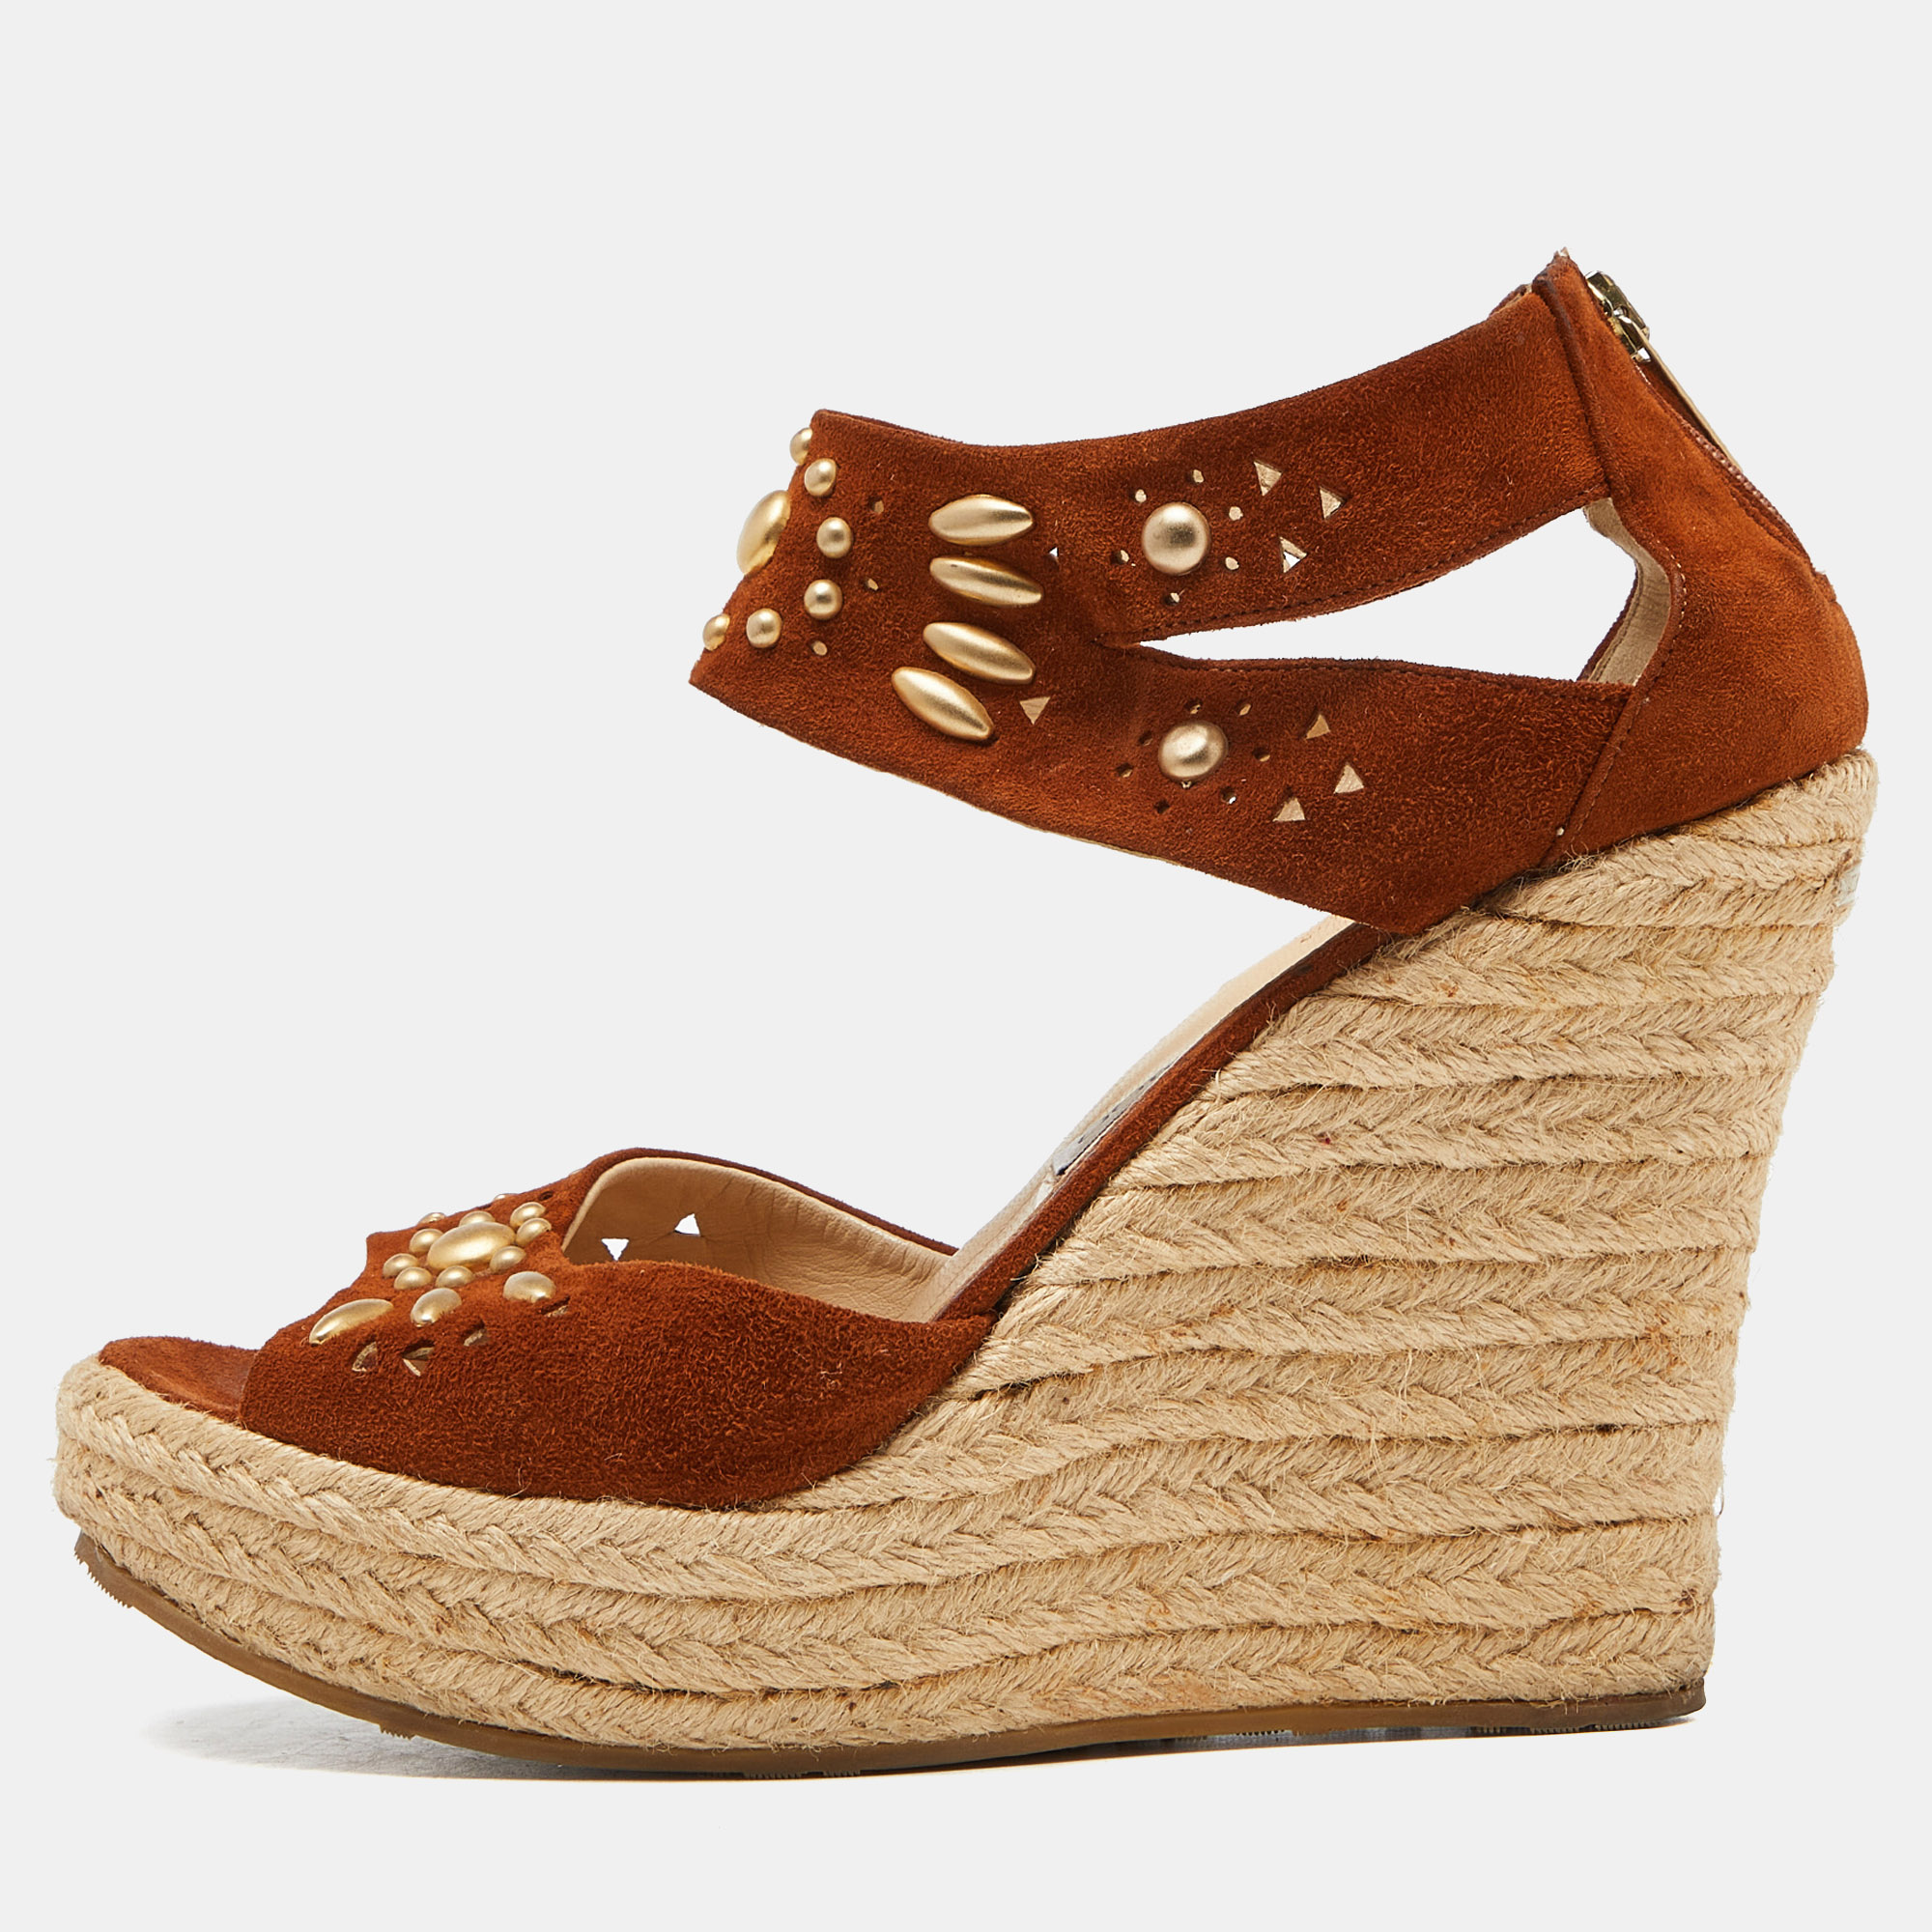 Discover footwear elegance with these designer womens wedge sandals. Meticulously designed these heels seamlessly marry fashion and comfort ensuring you shine in every setting.